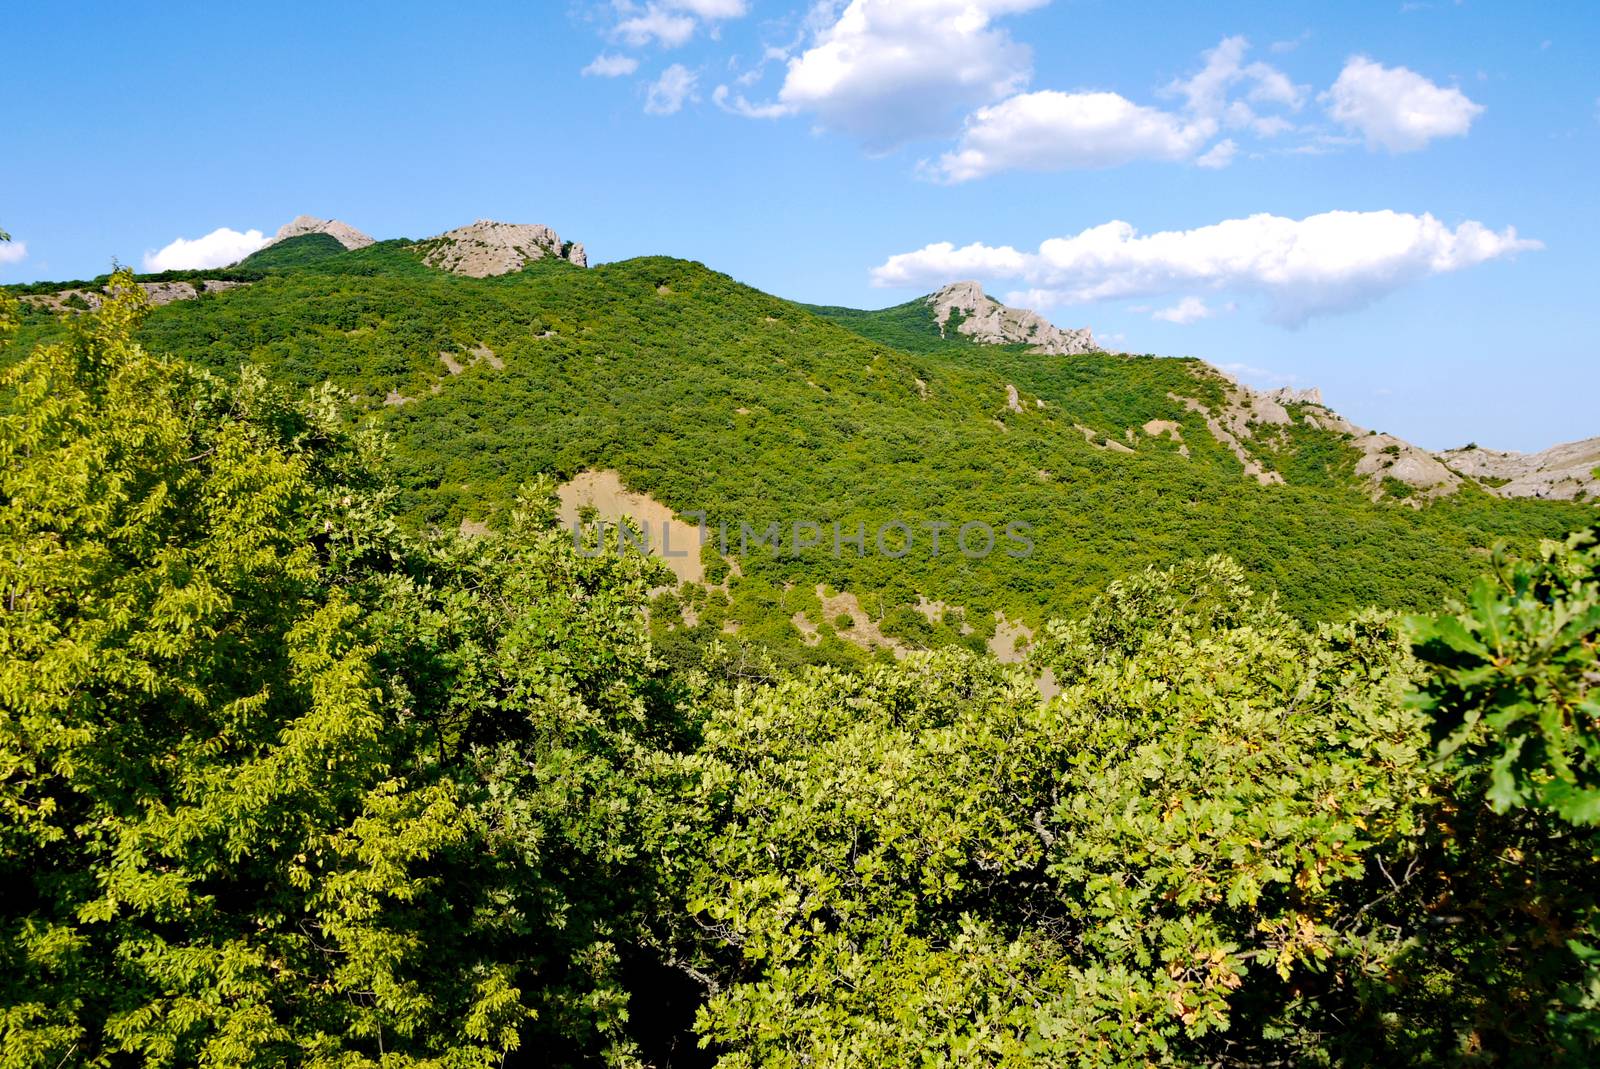 high slopes covered with grass on the blue sky background